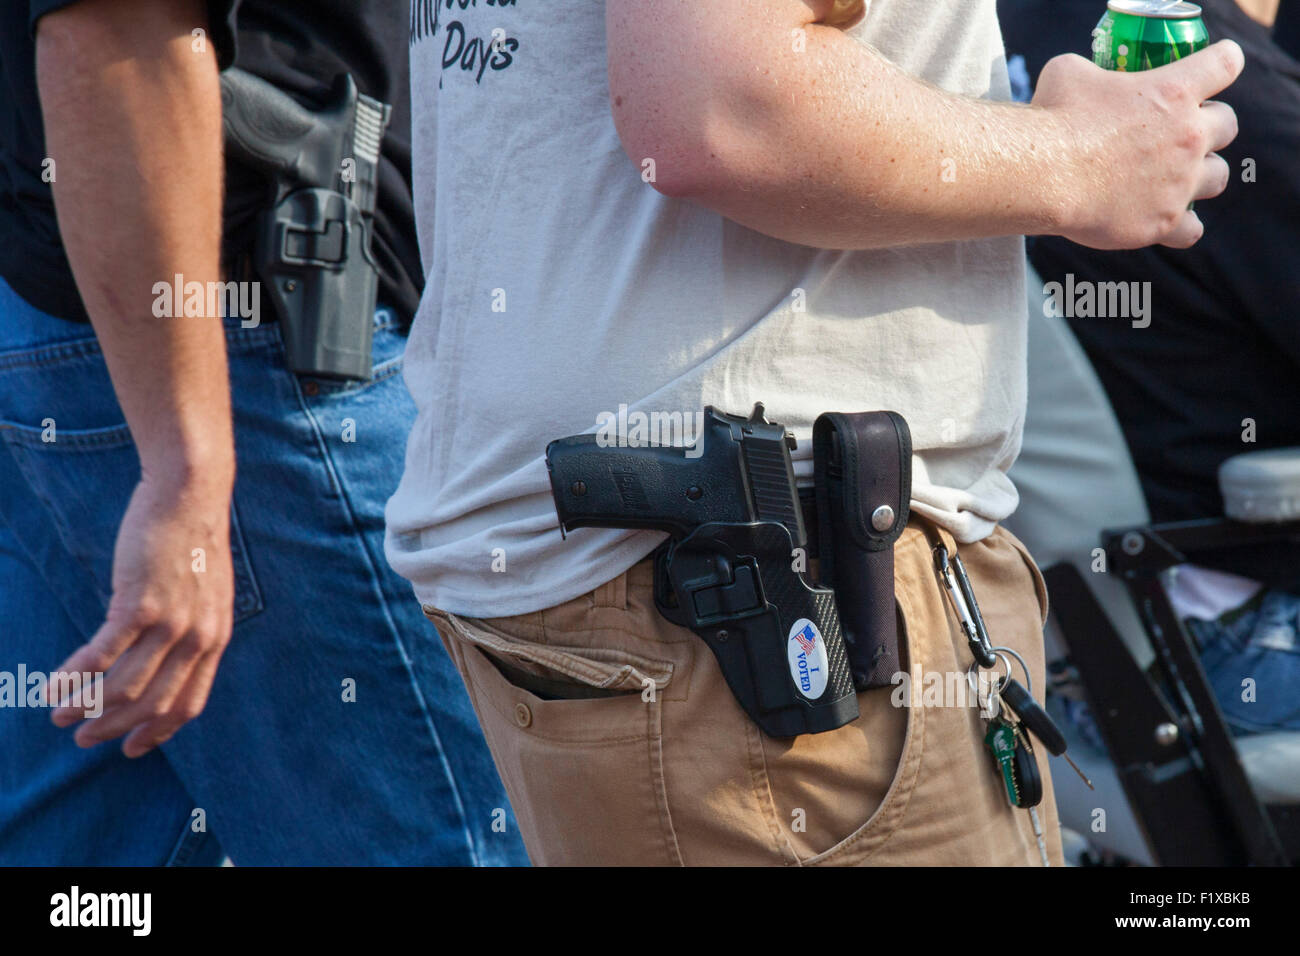 Detroit, Michigan - Members of the Ironworkers union openly carry hand guns during Detroit's Labor Day parade. Stock Photo